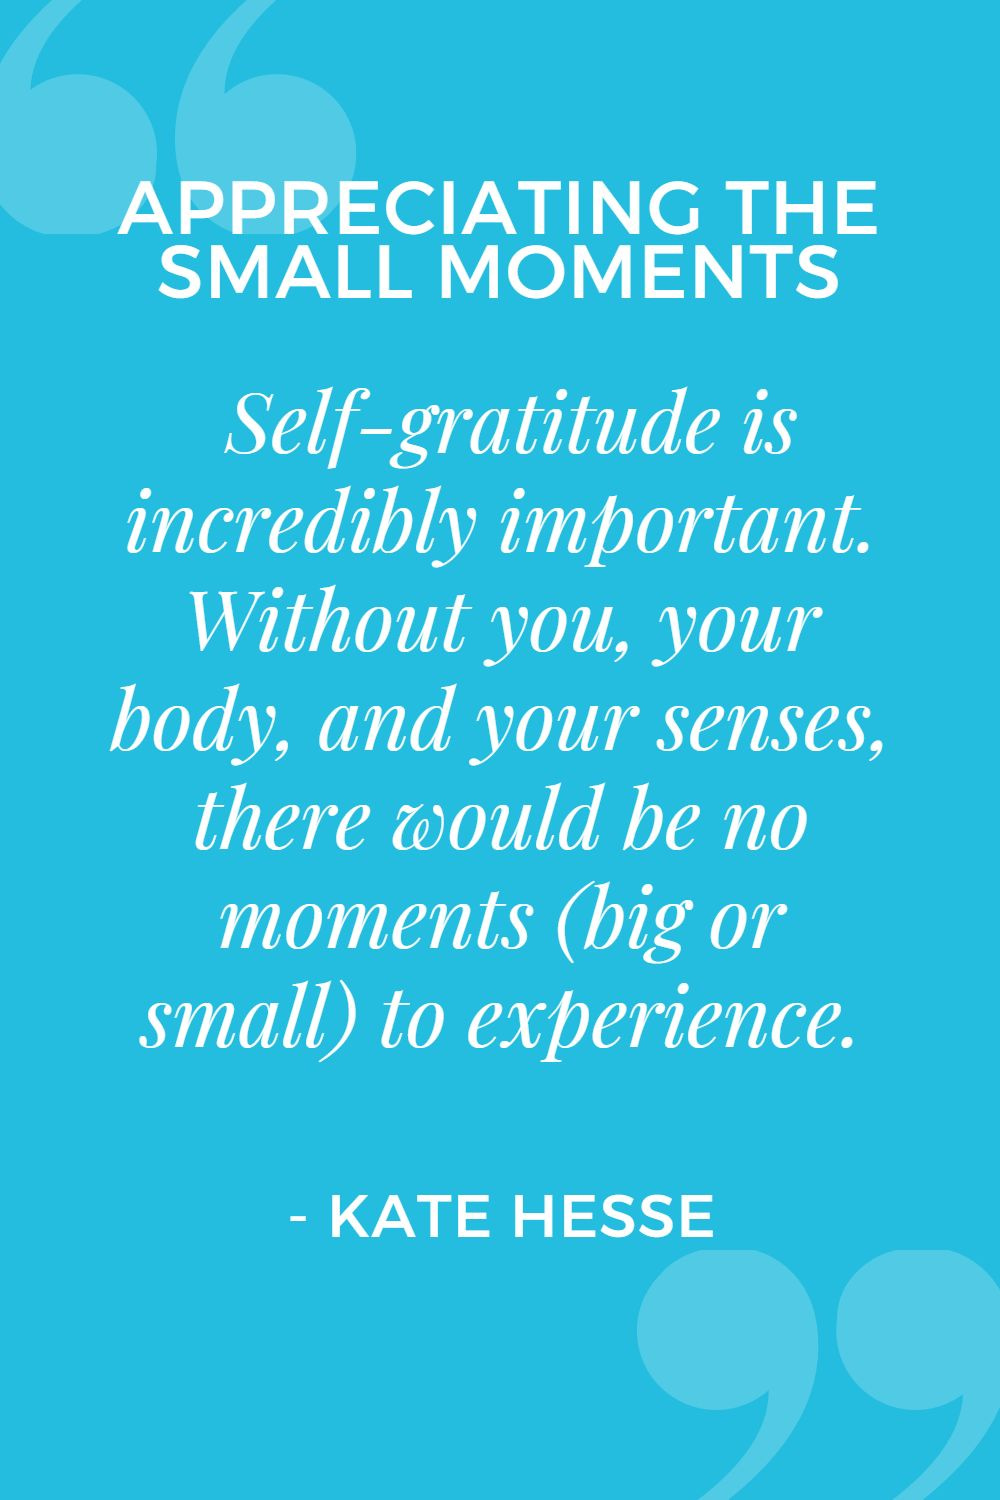 Self-gratitude is incredibly important. Without you, your body, and your senses, there would be no moments (big or small) to experience.